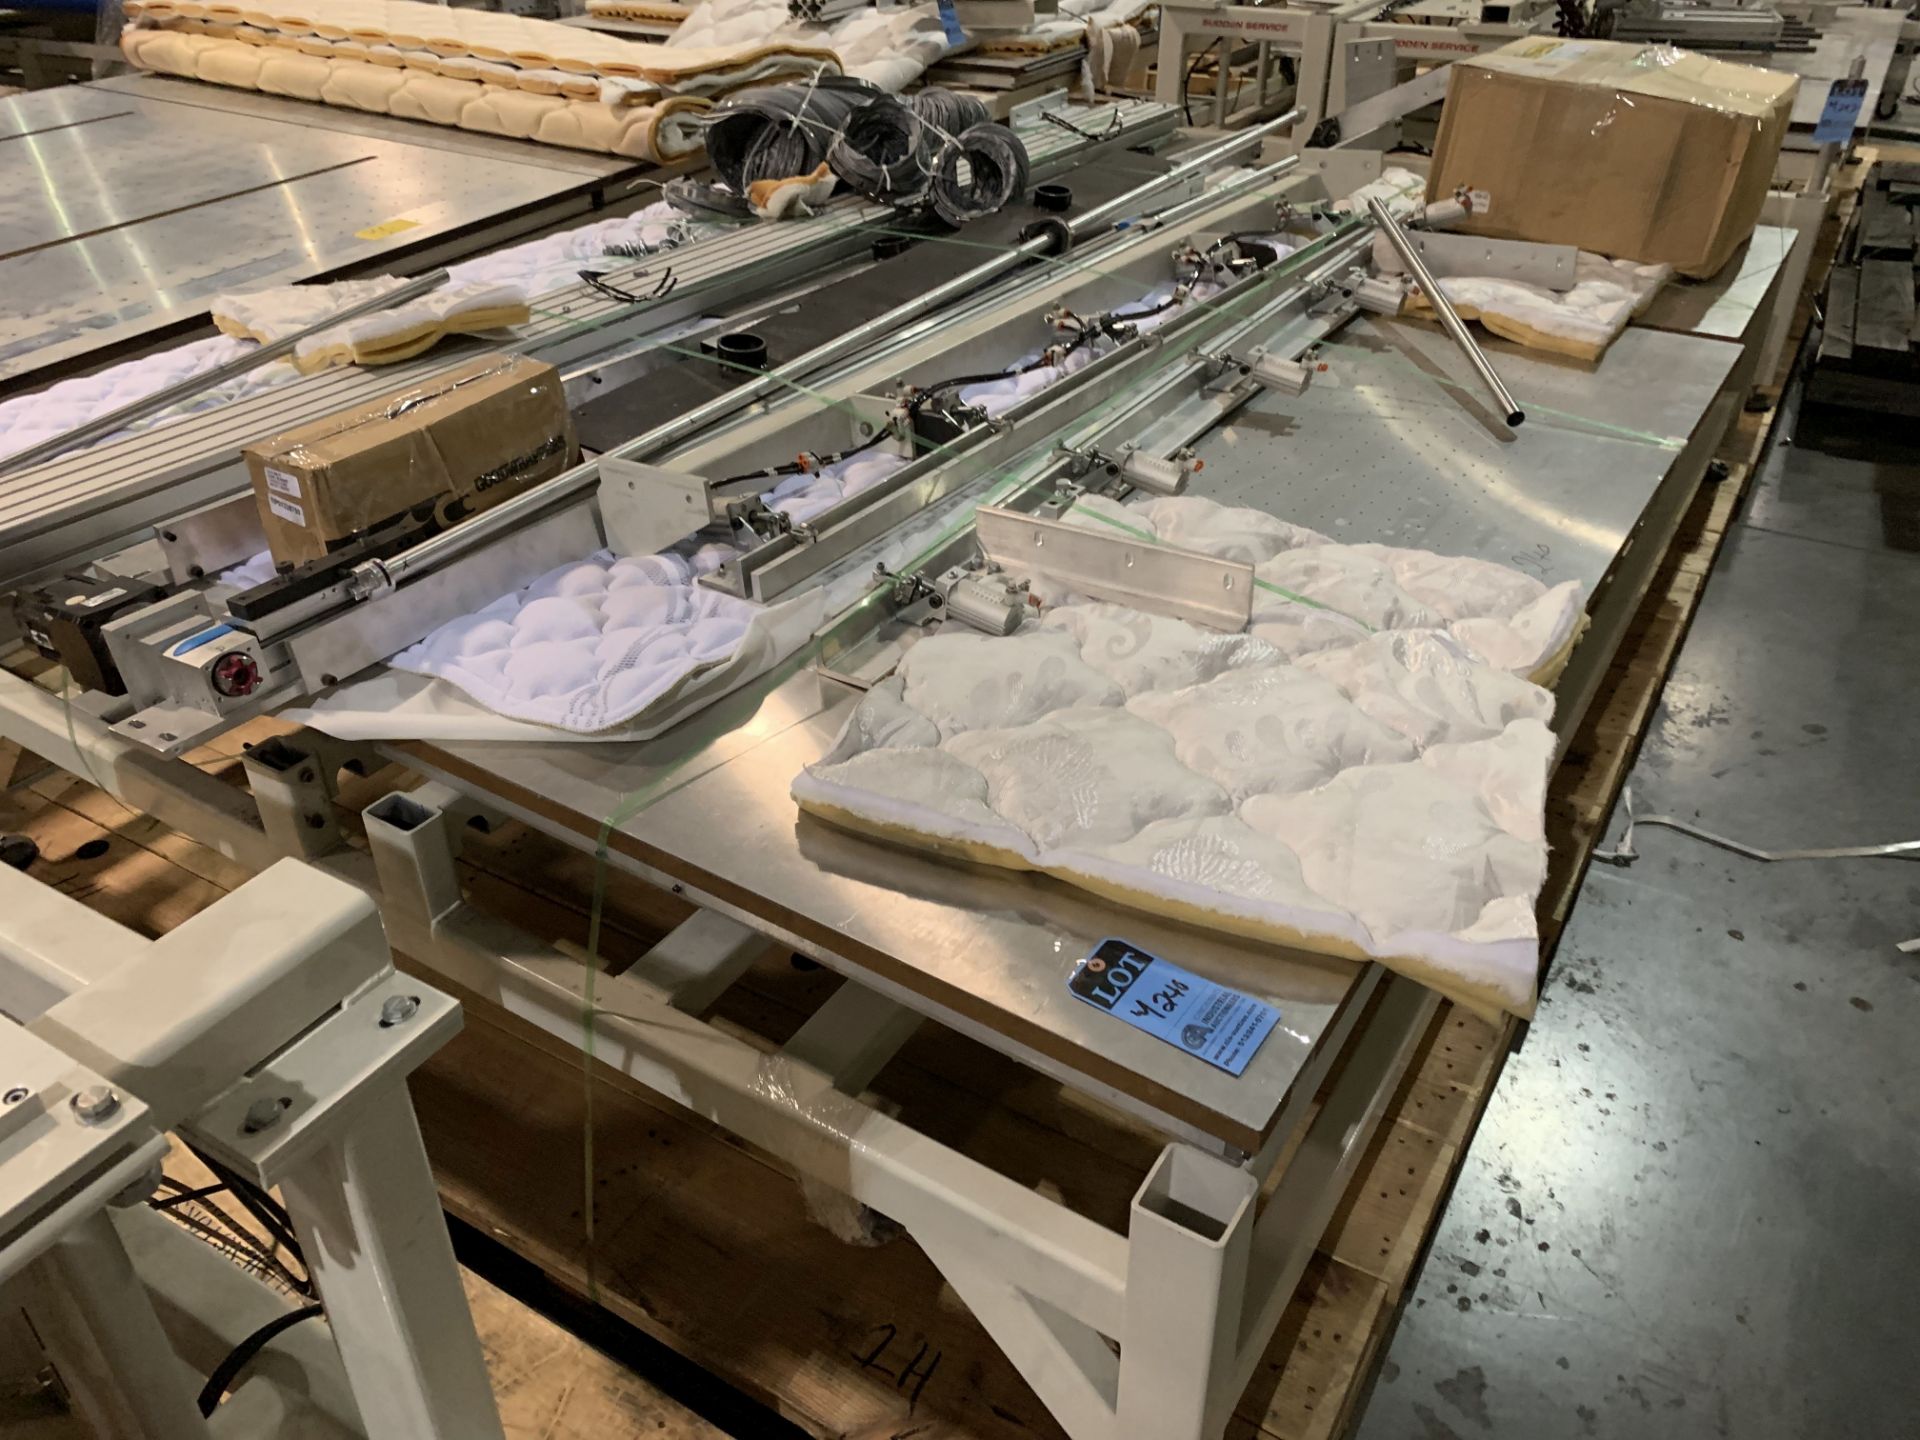 ATLANTA ATTACHMENT FOAM PANEL STRETCH TABLE W/ DELIVERY SYSTEM (PARTS MISSING) - Image 2 of 2